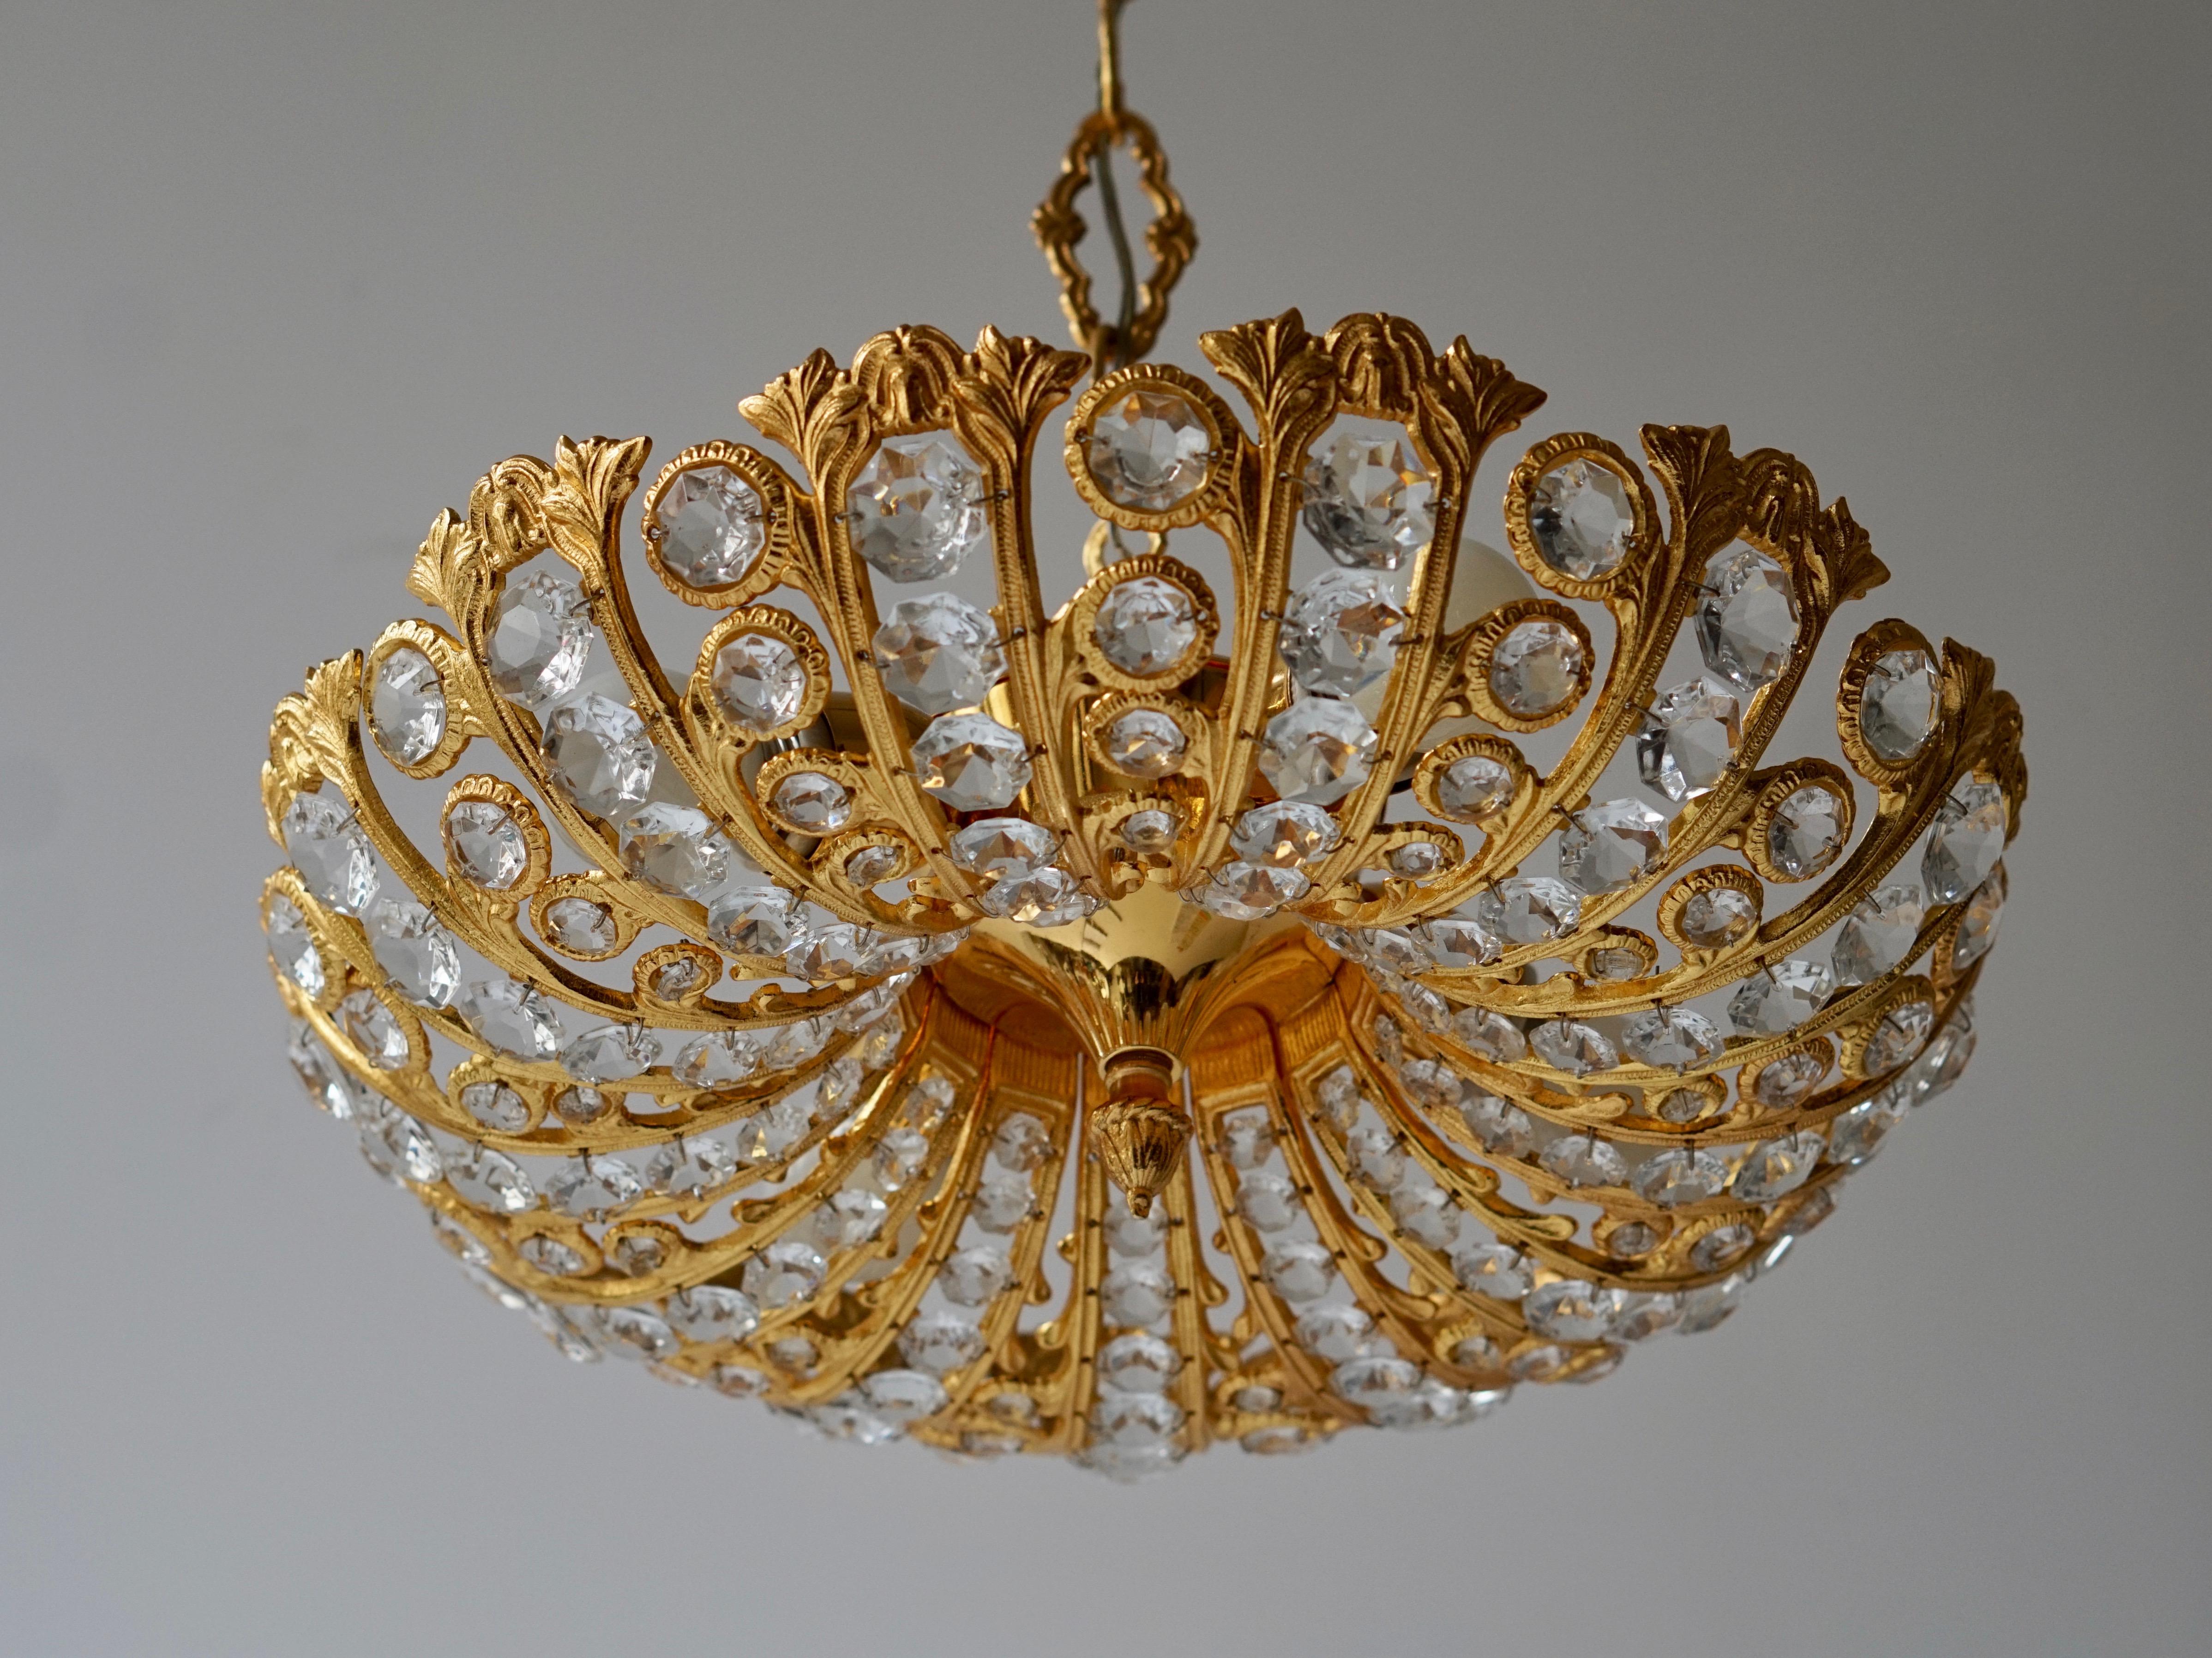 Rare and grand Palwa lamp designed by Ernest Palm and produced in the 60s in Barcelona. 
Golden structure composed of cut crystals in perfect state of preservation. Rare design object that will brighten your interior perfectly.
A vintage 4-light